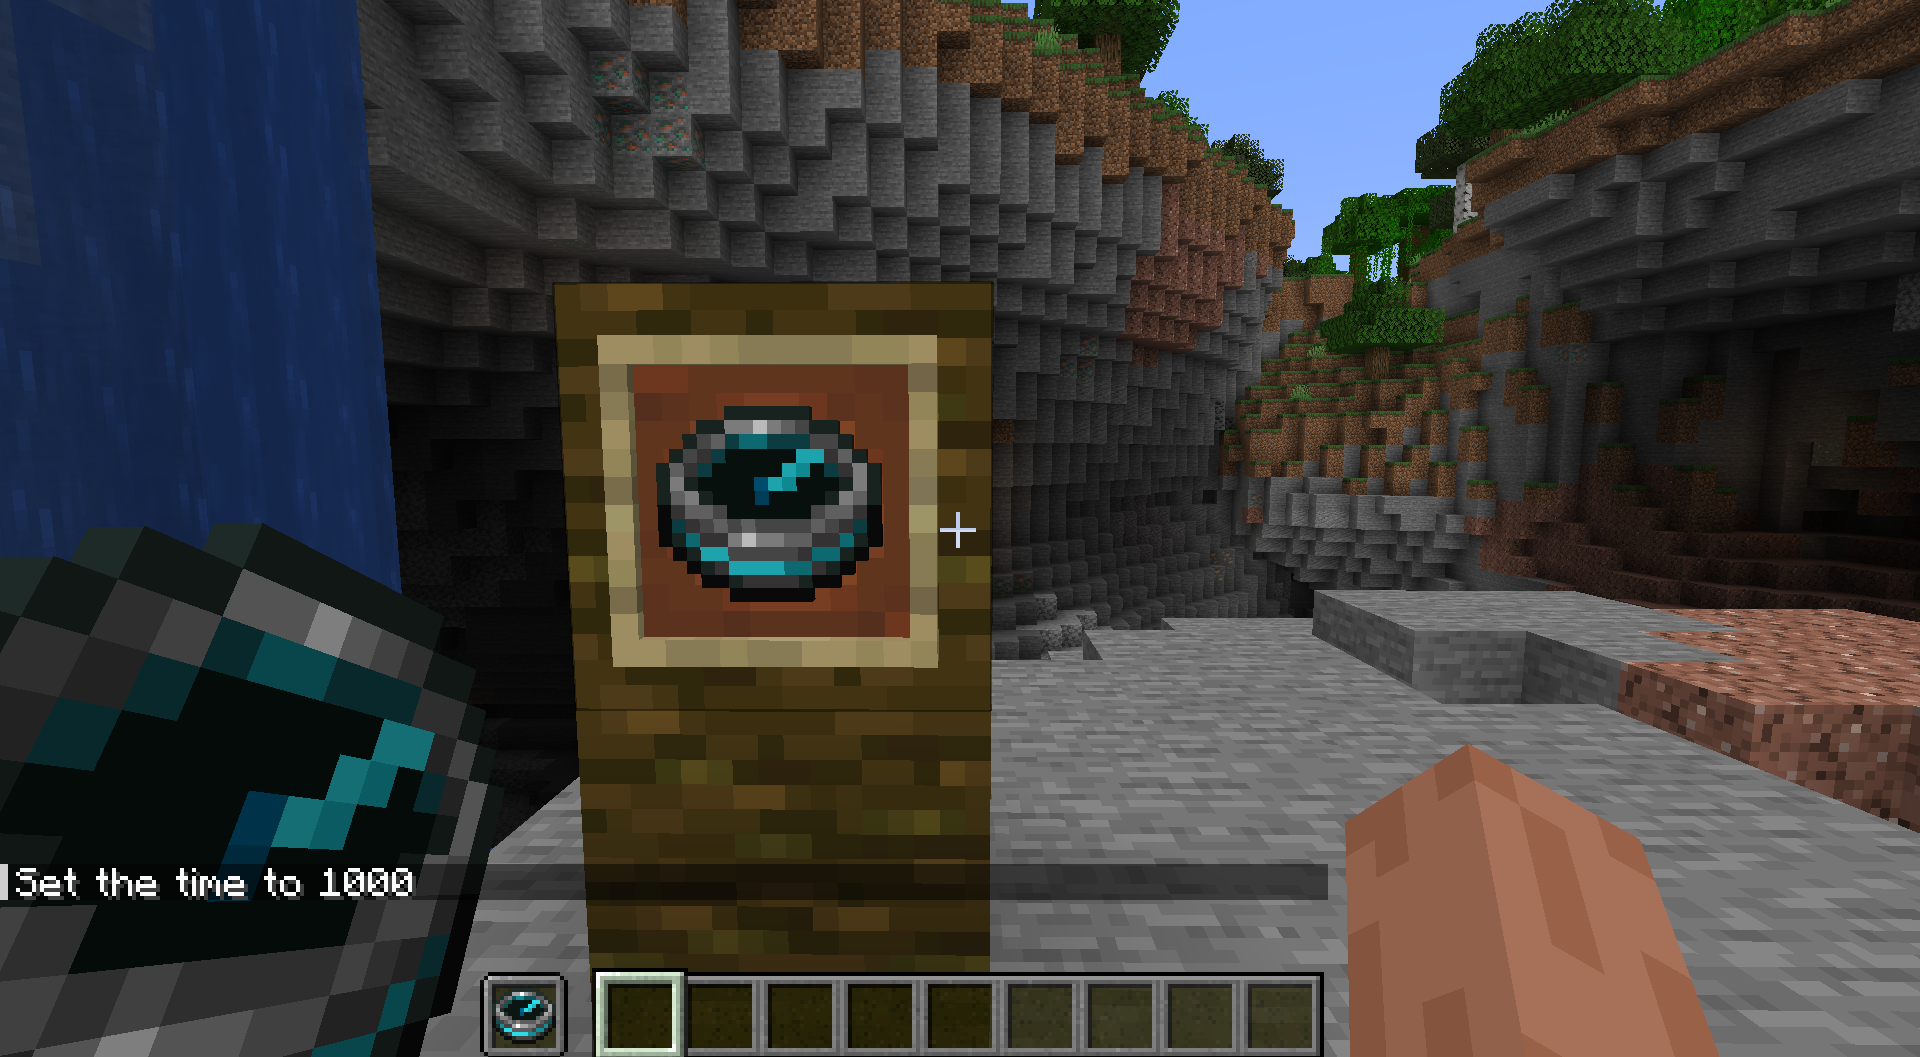 Notice that the item frame matches the held compass, as well as the icon in the offhand slot.